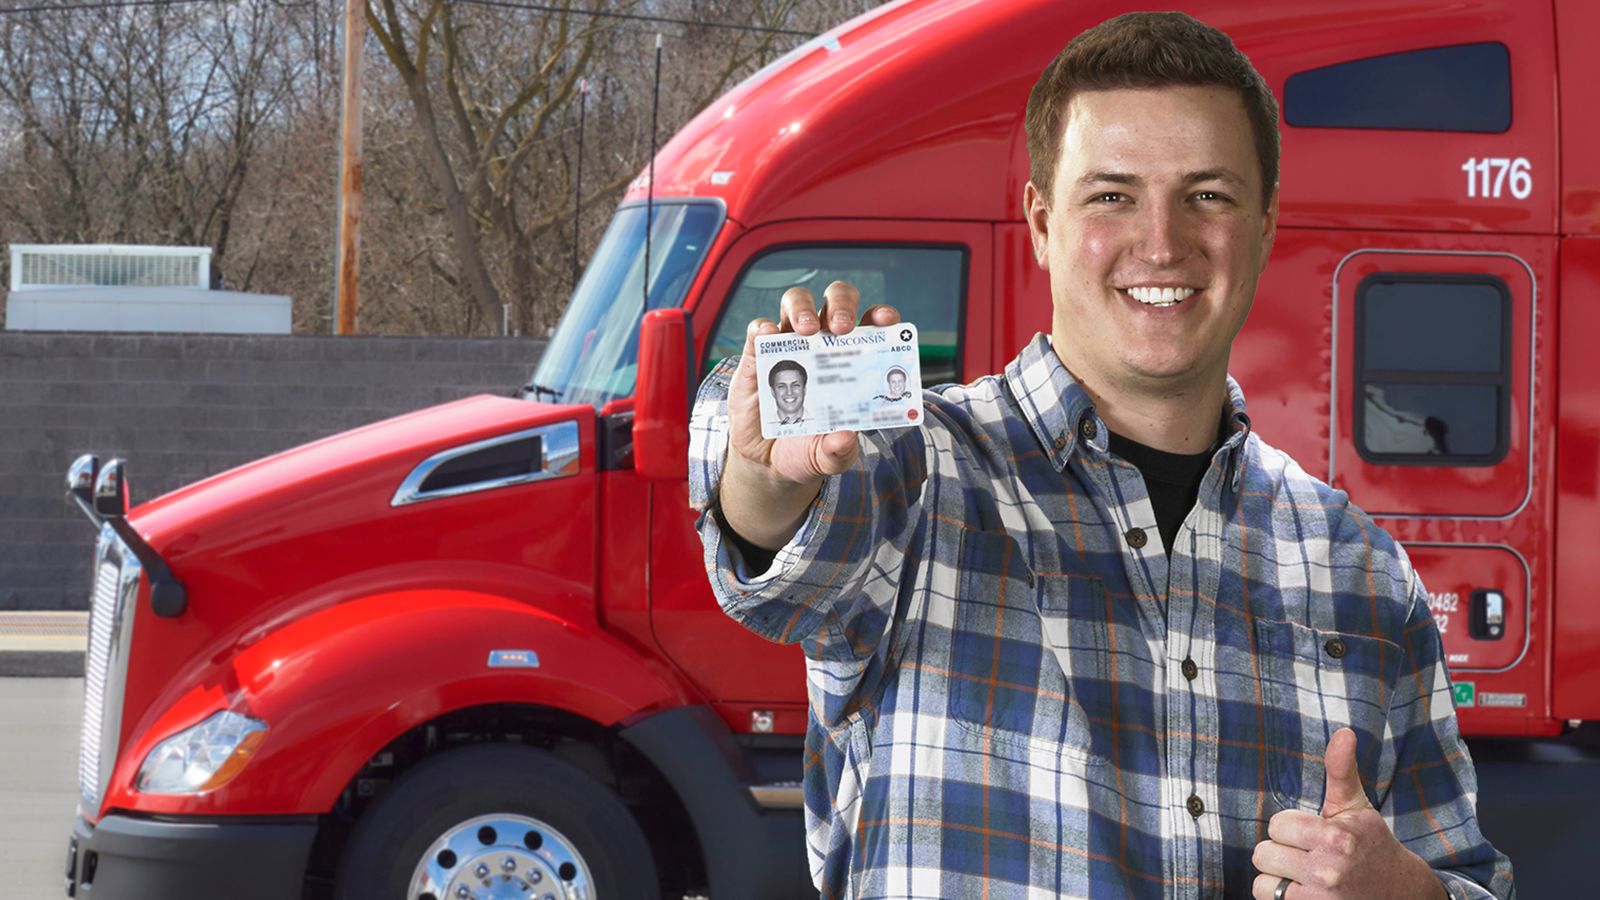 Commercial drivers license information system (CDLIS)